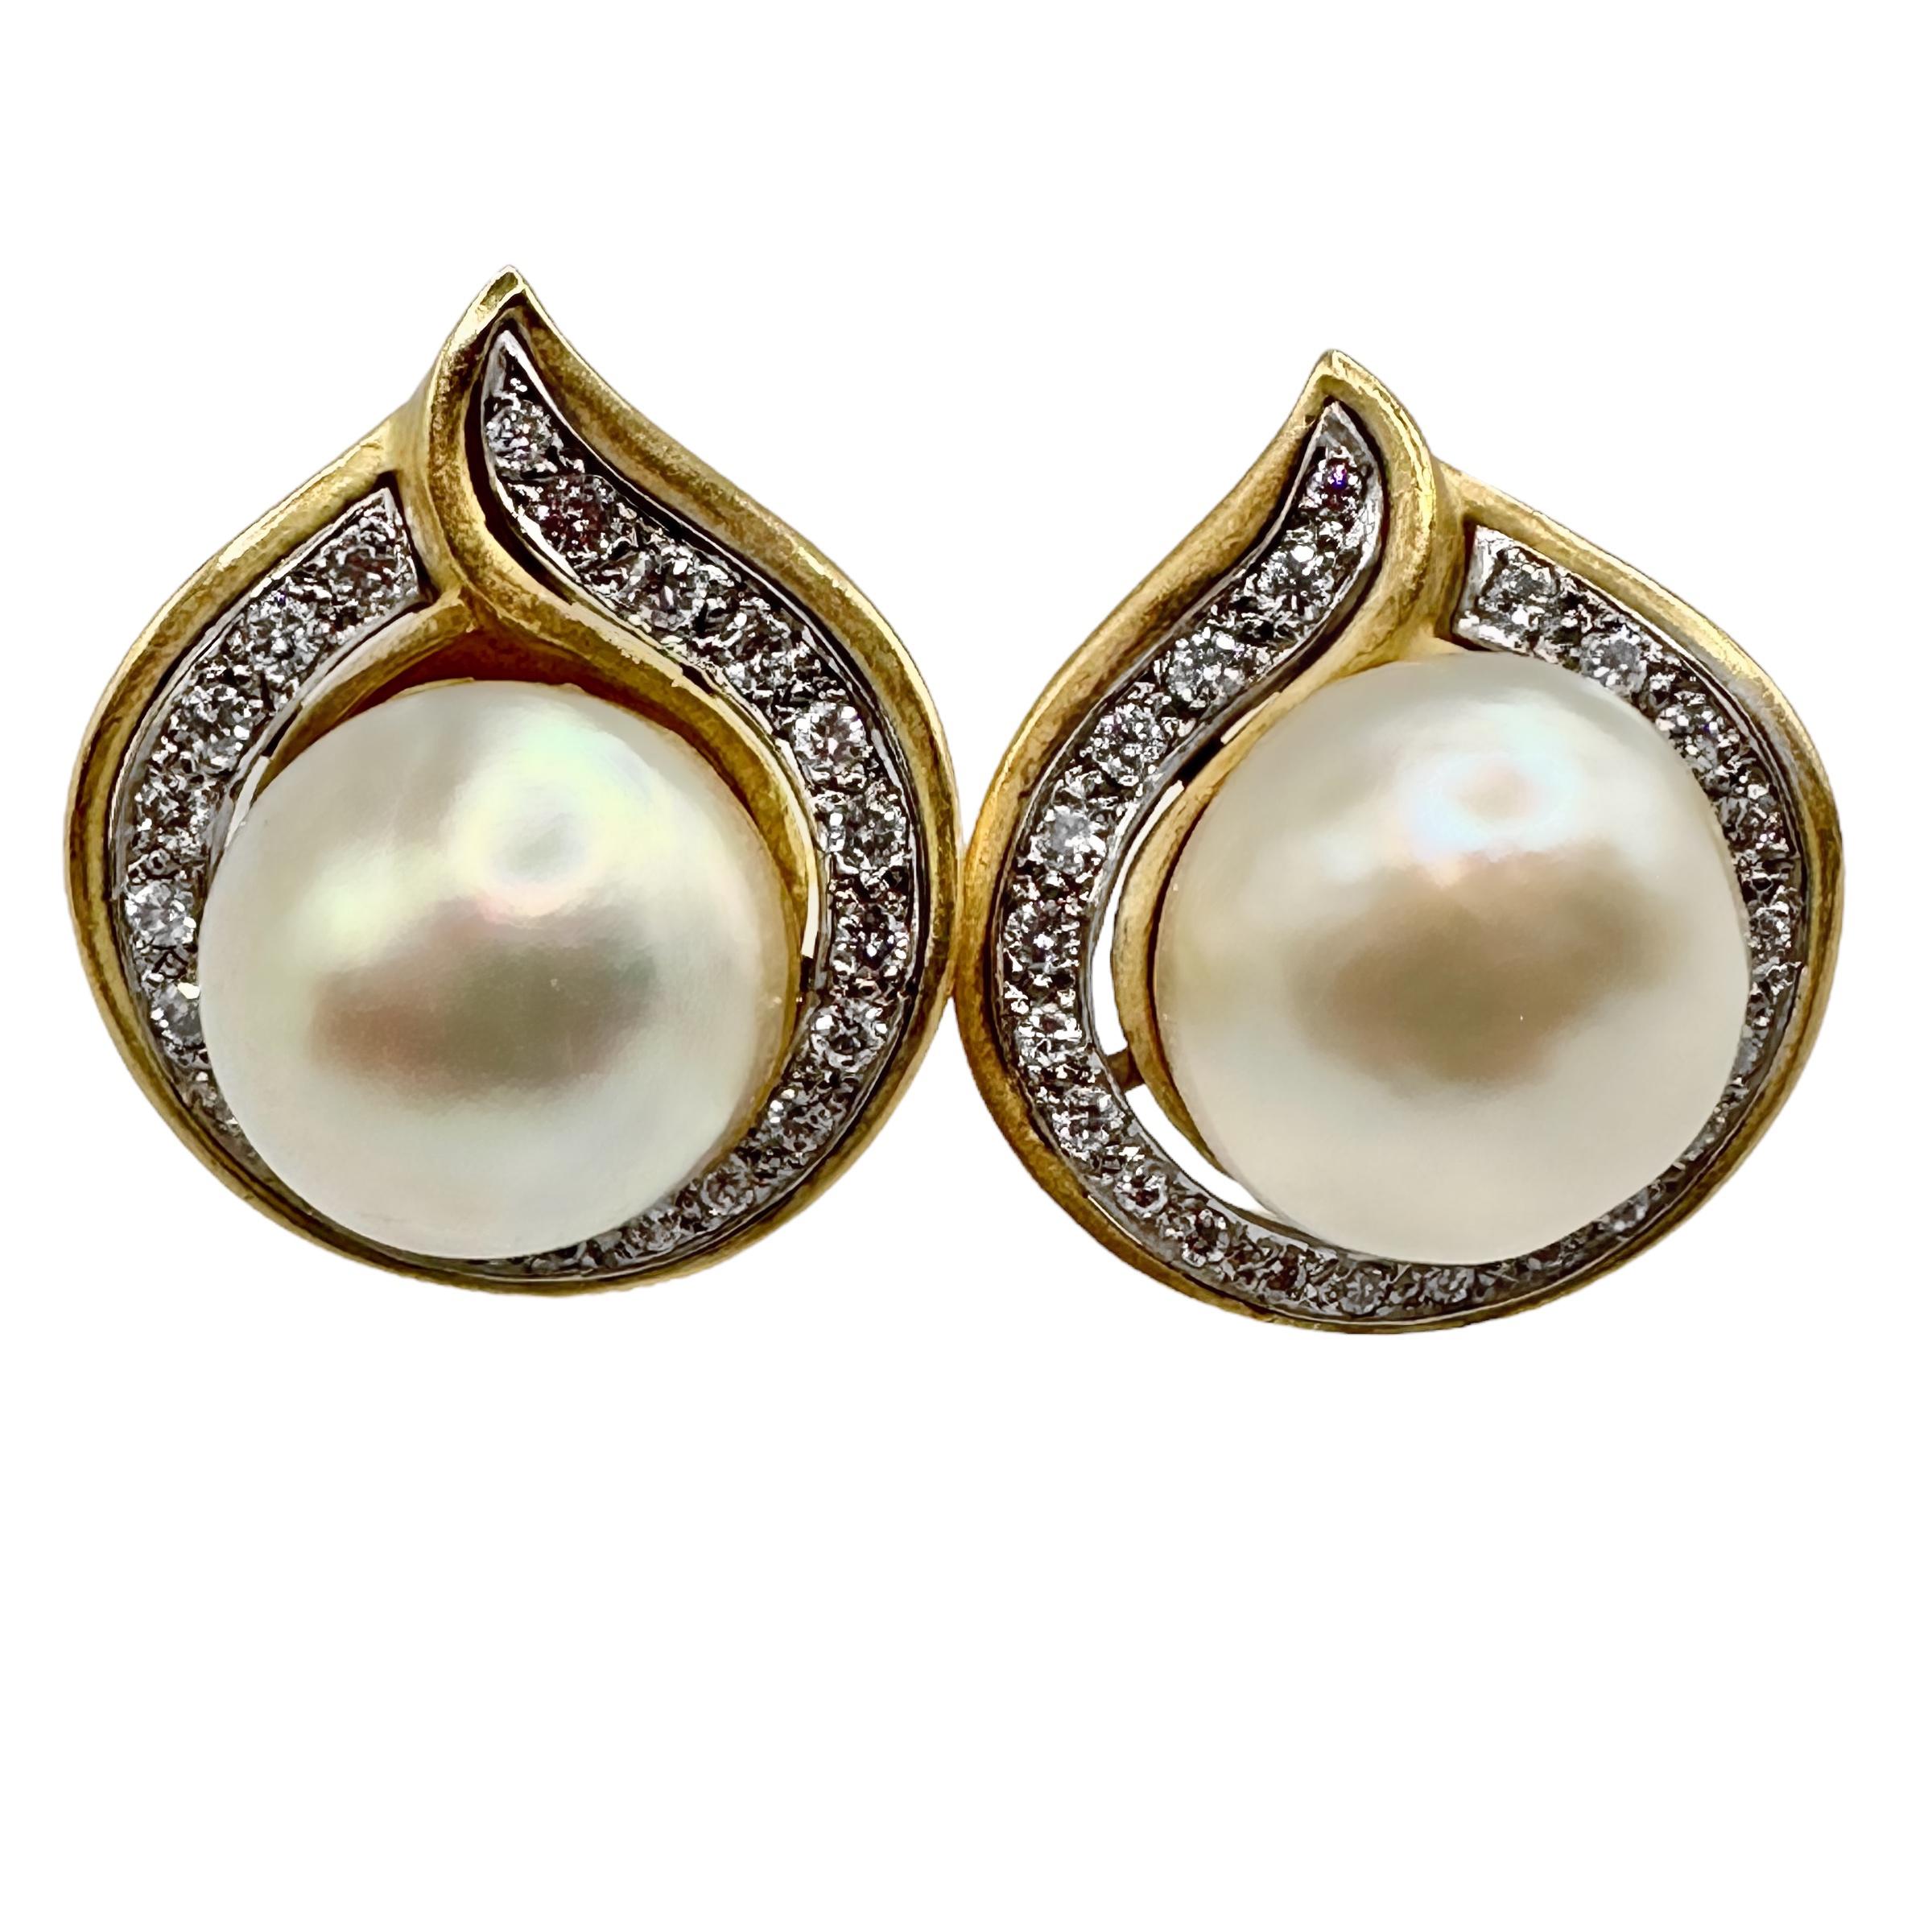 This very versatile pair of late-20th century 18K yellow gold designer fashion earrings is set with two 13.5mm semi-baroque South Sea pearls surrounded by a line of brilliant cut diamonds, set in white gold plates.  They can be worn alone or as tops